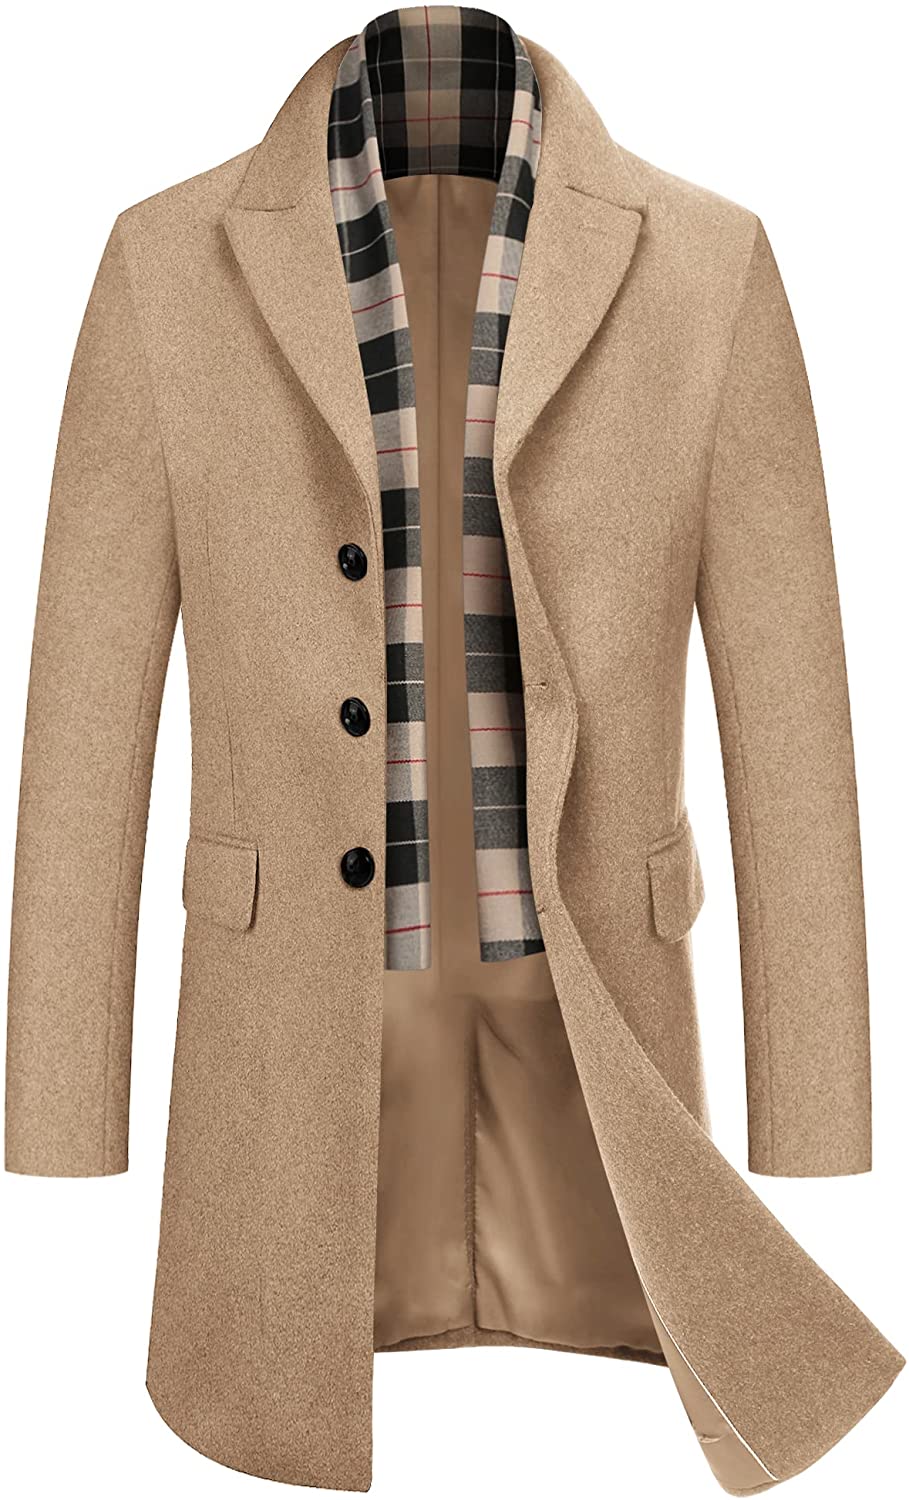 COOFANDY Mens Wool Blend Coat with Detachable Scarf Single Breasted Top Coats Winter Warm Short Overcoats Jackets 